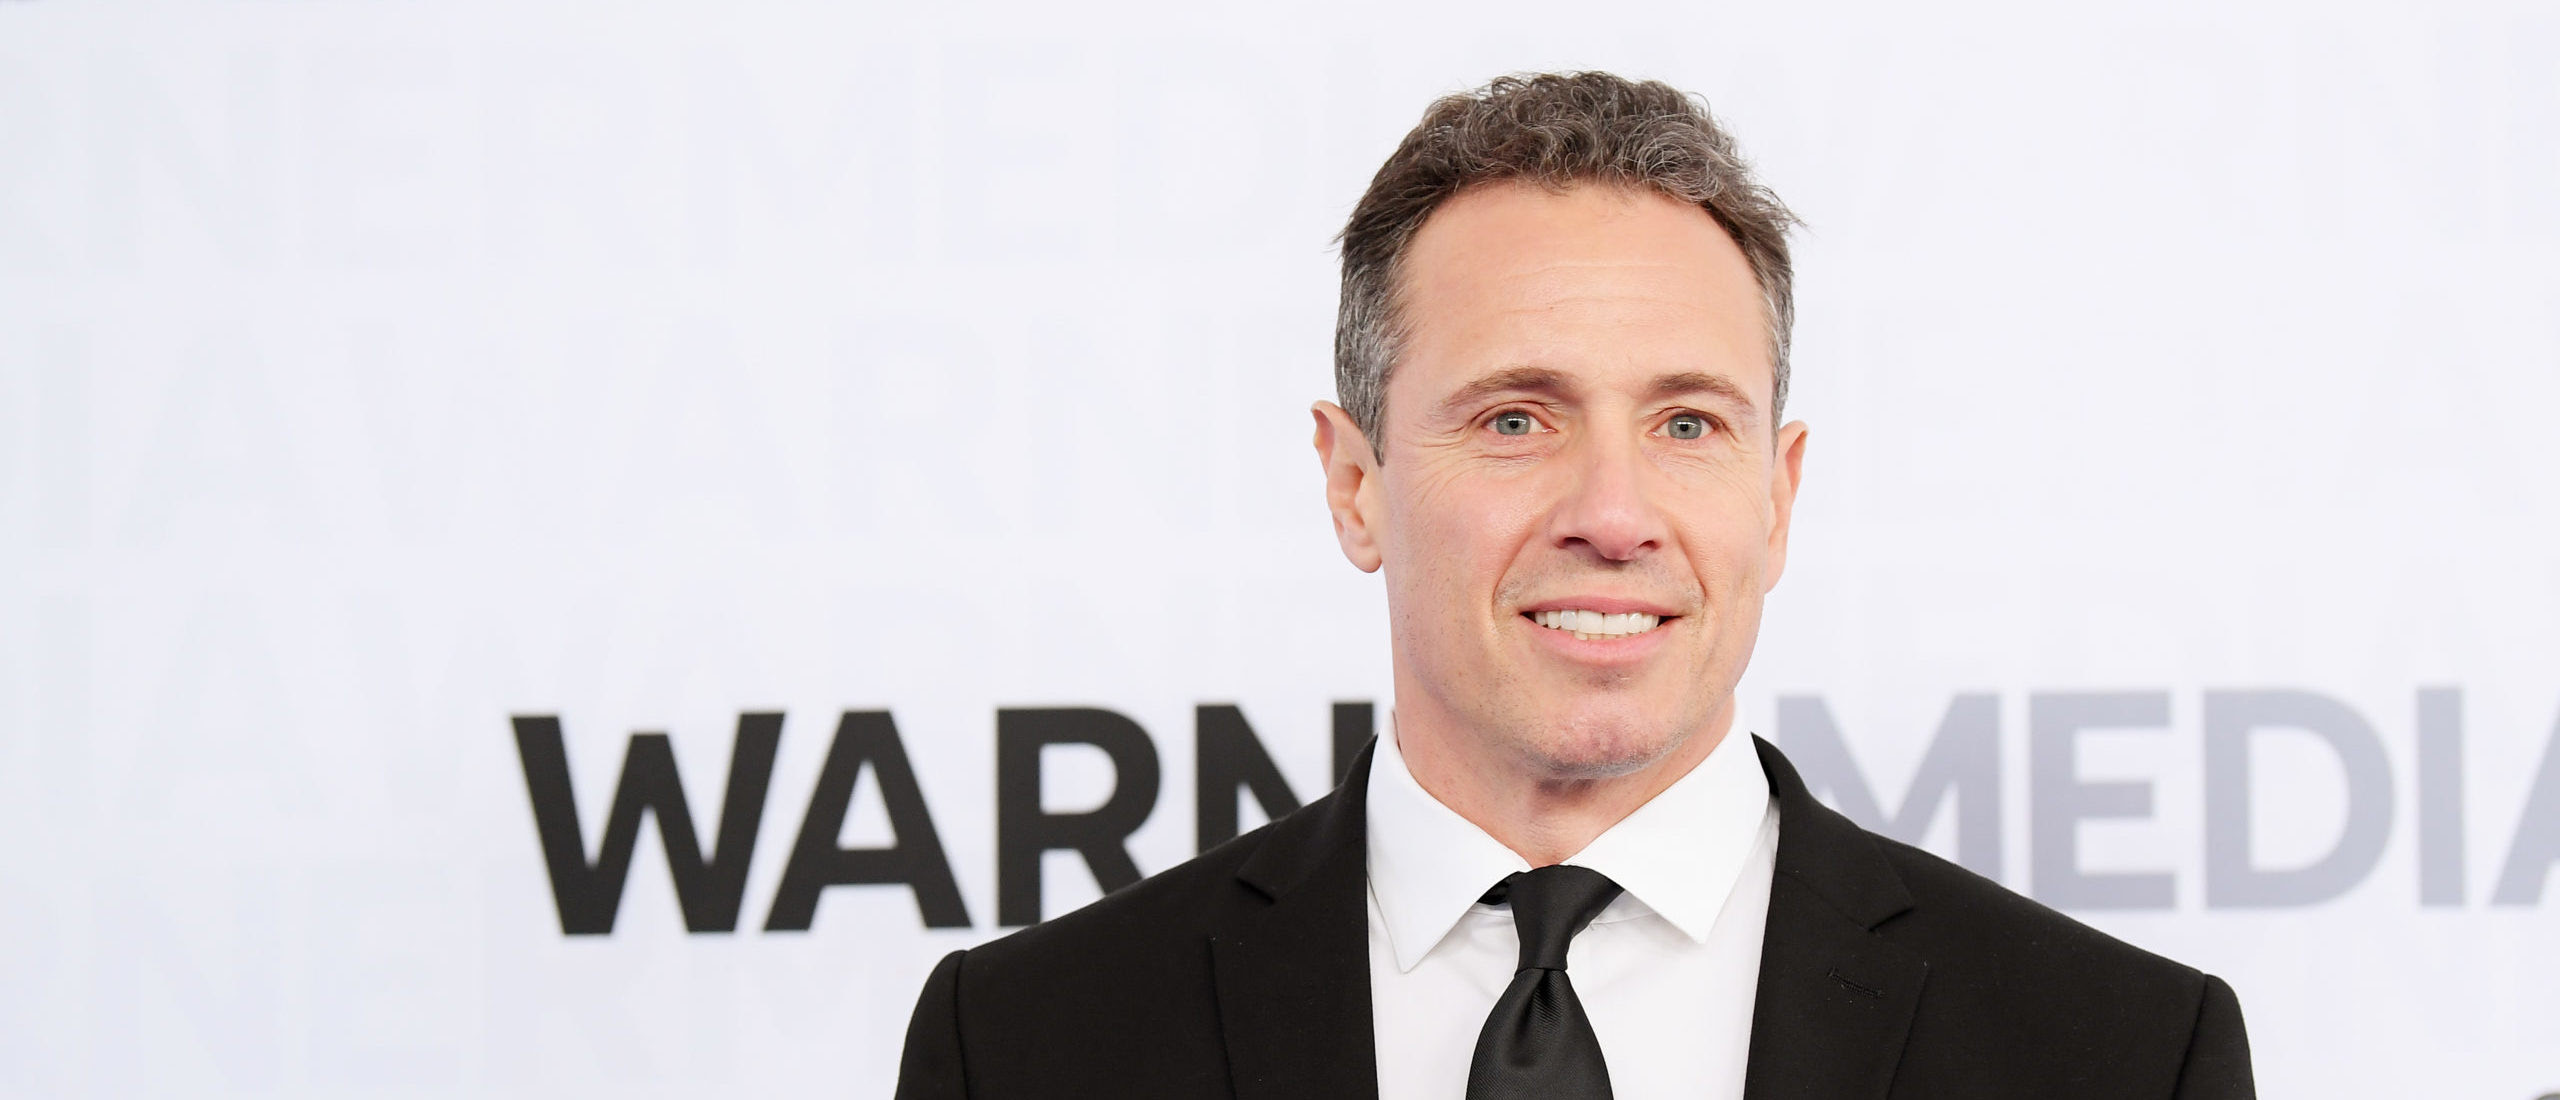 CNN Fires Chris Cuomo For Involvement In Covering Up His Brother’s Sexual Assault Case